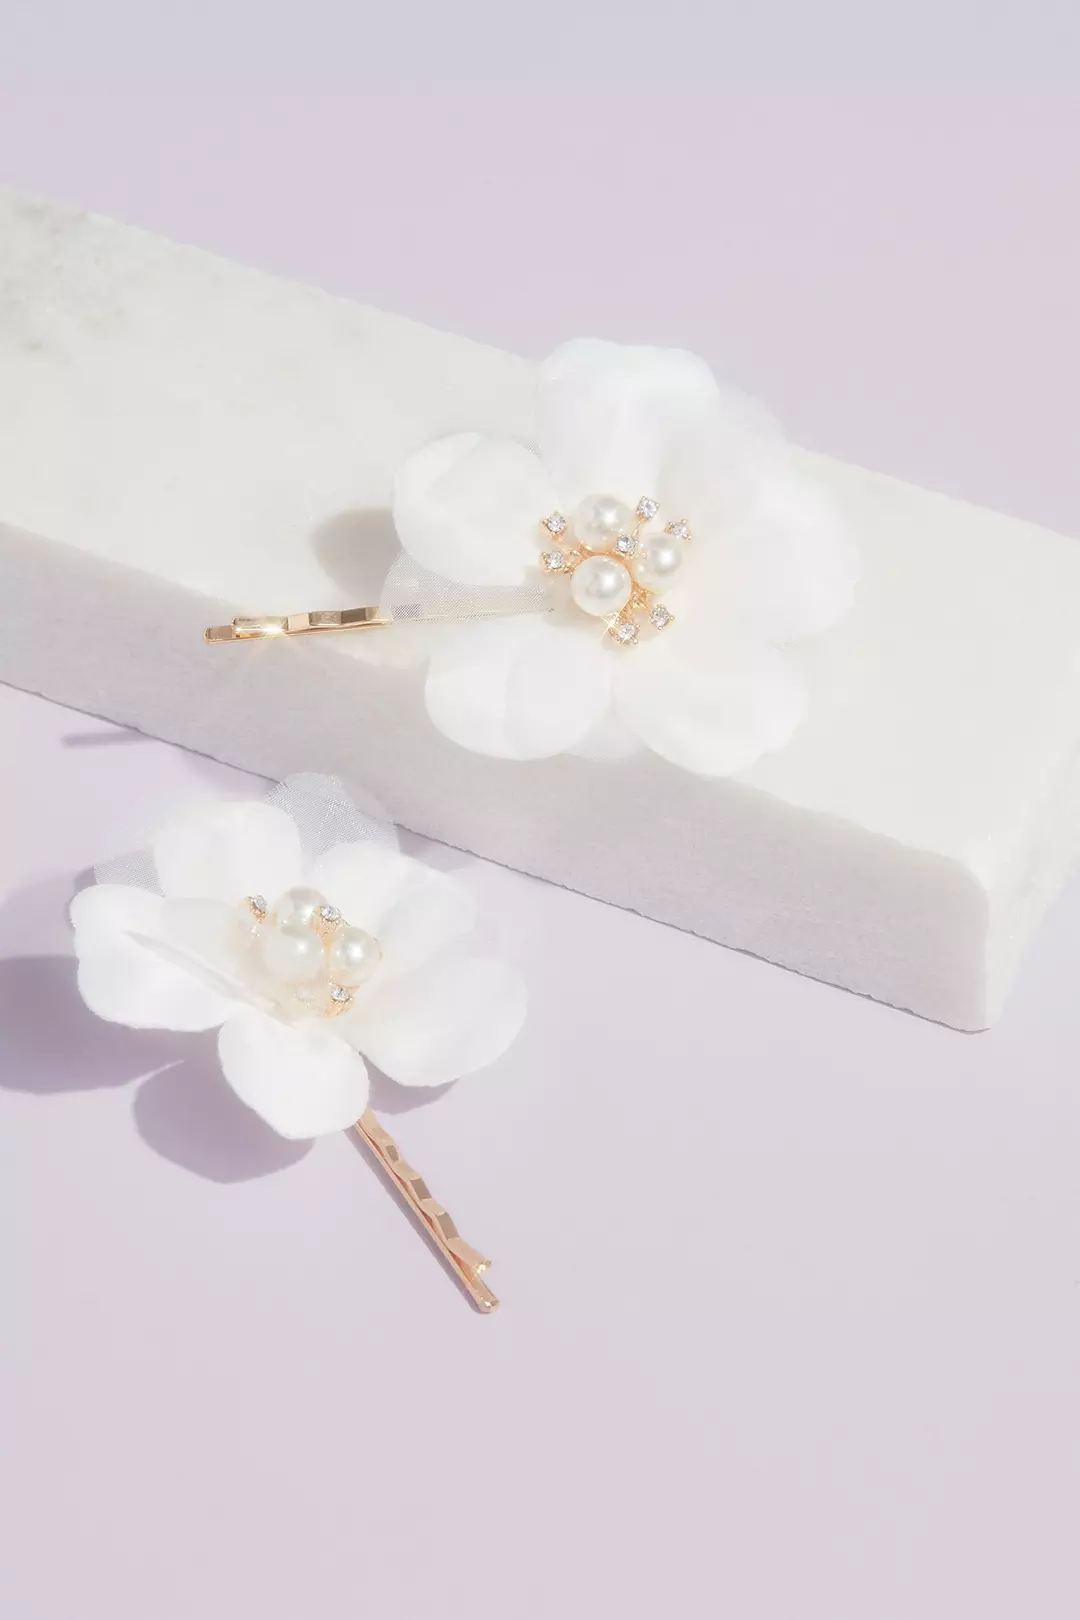 Fabric Petal Floral Hair Pin Set with Pearl Accent Image